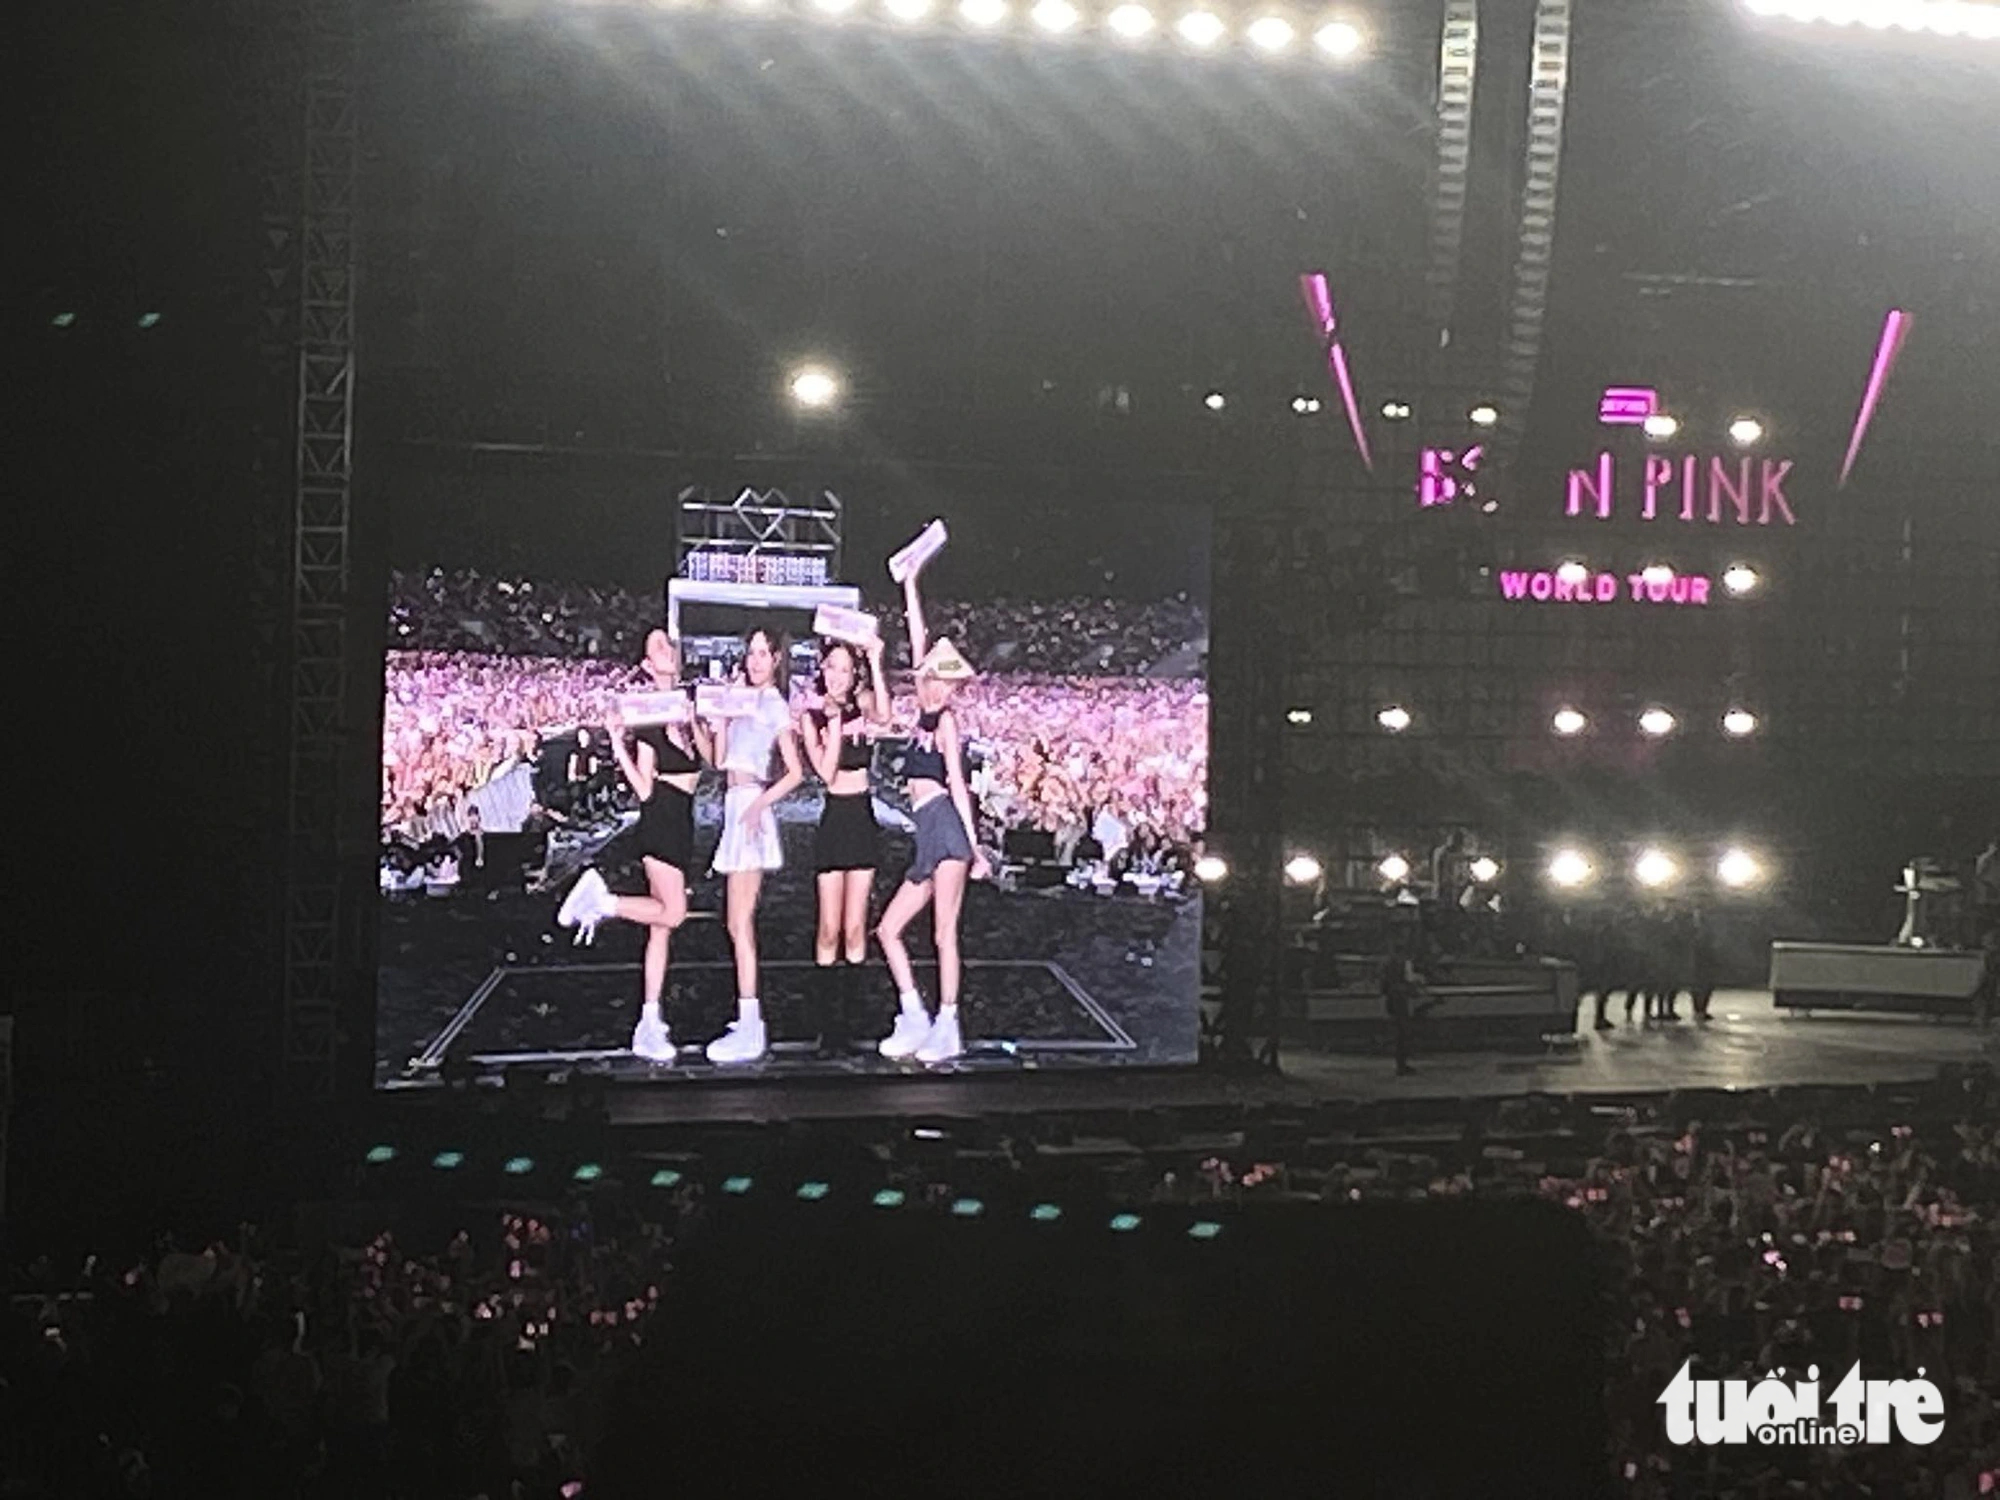 BlackPink successfully wraps up first concert night in Hanoi, drawing over 30,000 fans